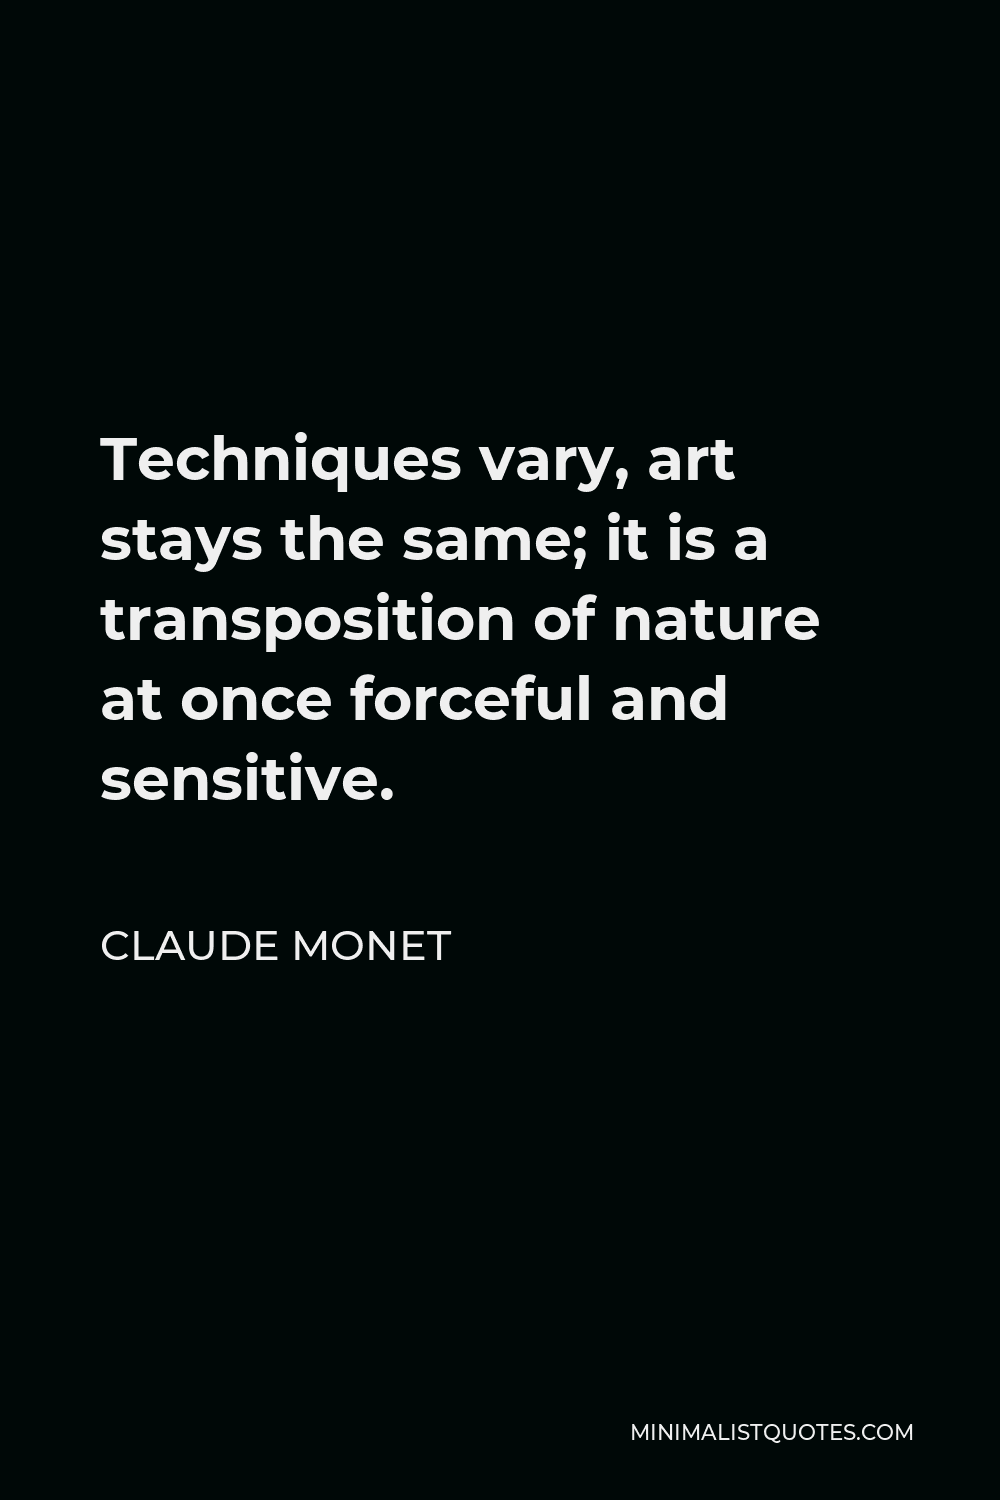 Claude Monet Quote - Techniques vary, art stays the same; it is a transposition of nature at once forceful and sensitive.